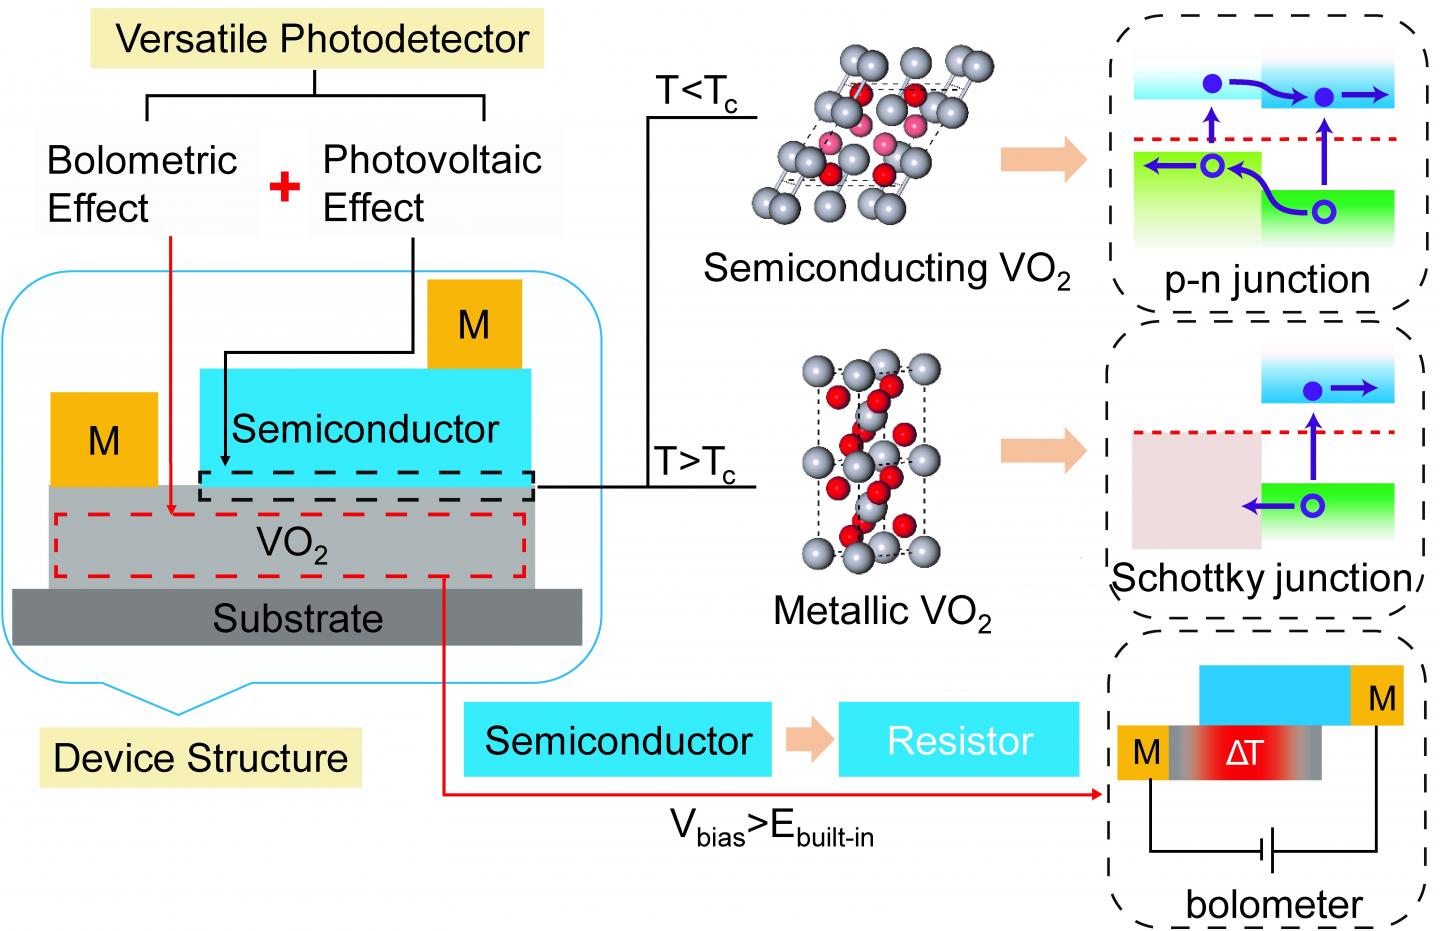 Strategy And Mechanisms Of The Versatile Photodetector